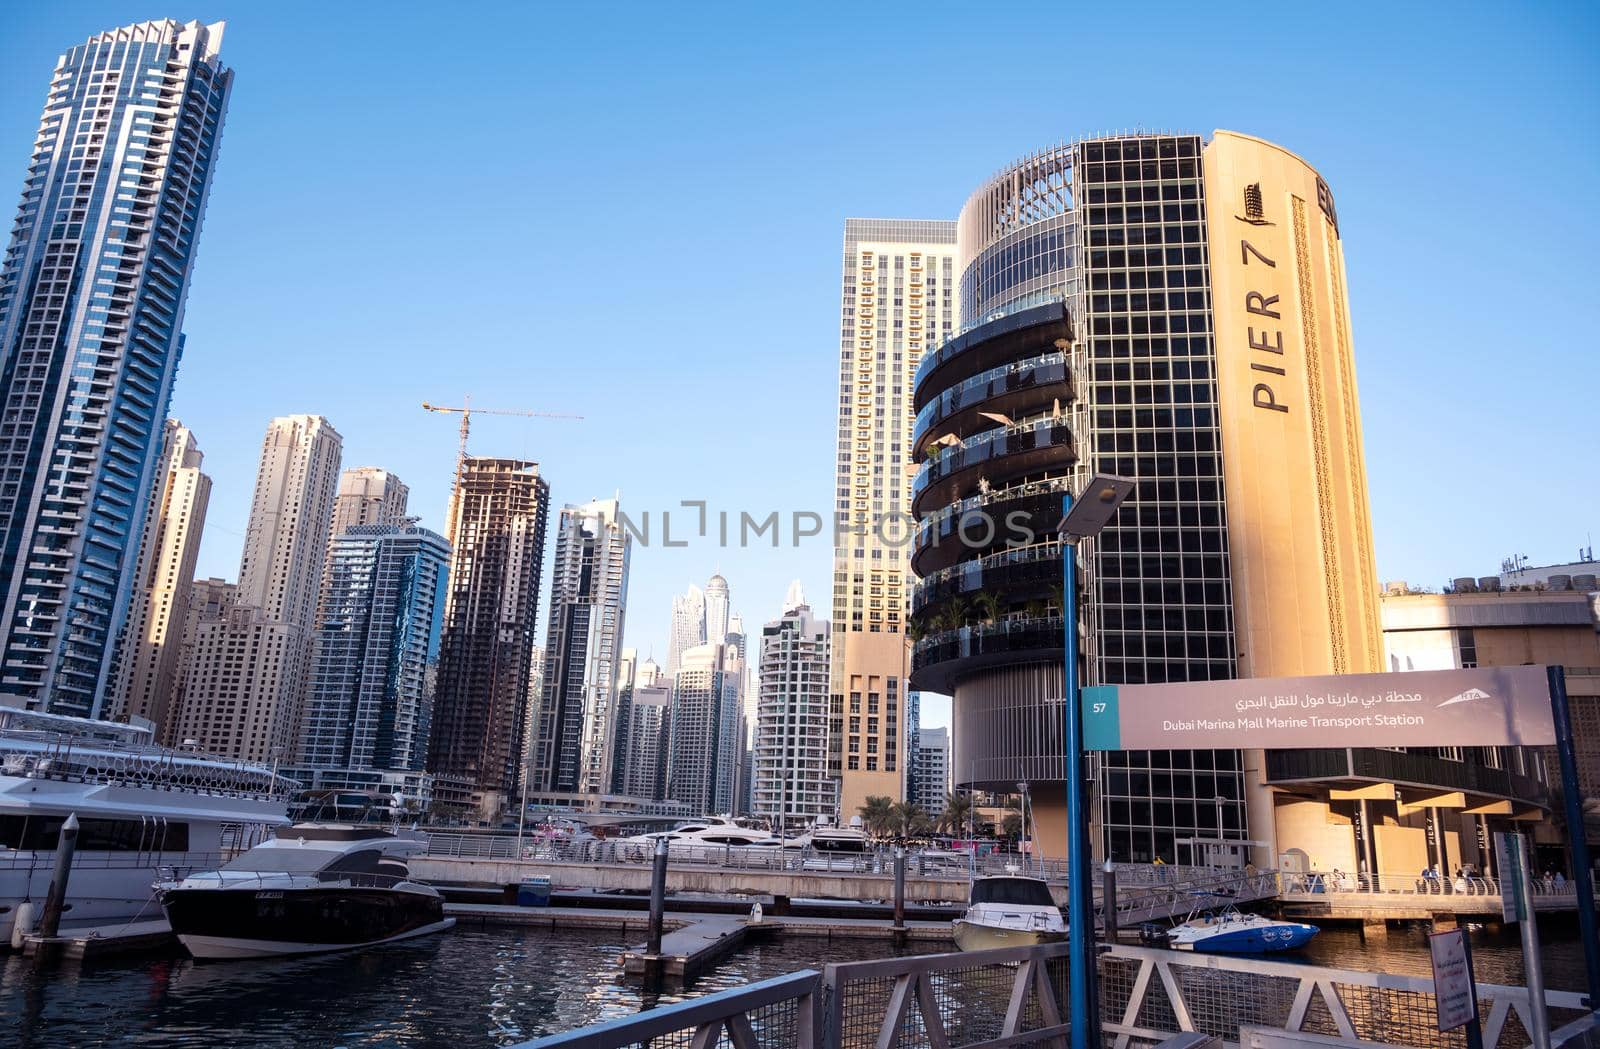 Dec 28, 2020 ,Dubai,UAE.Panoramic view of the beautiful Pier 7 restaurants in Dubai Marina luxury touristic district with Marina Mall and canal with yachts on background. Dubai Marina.